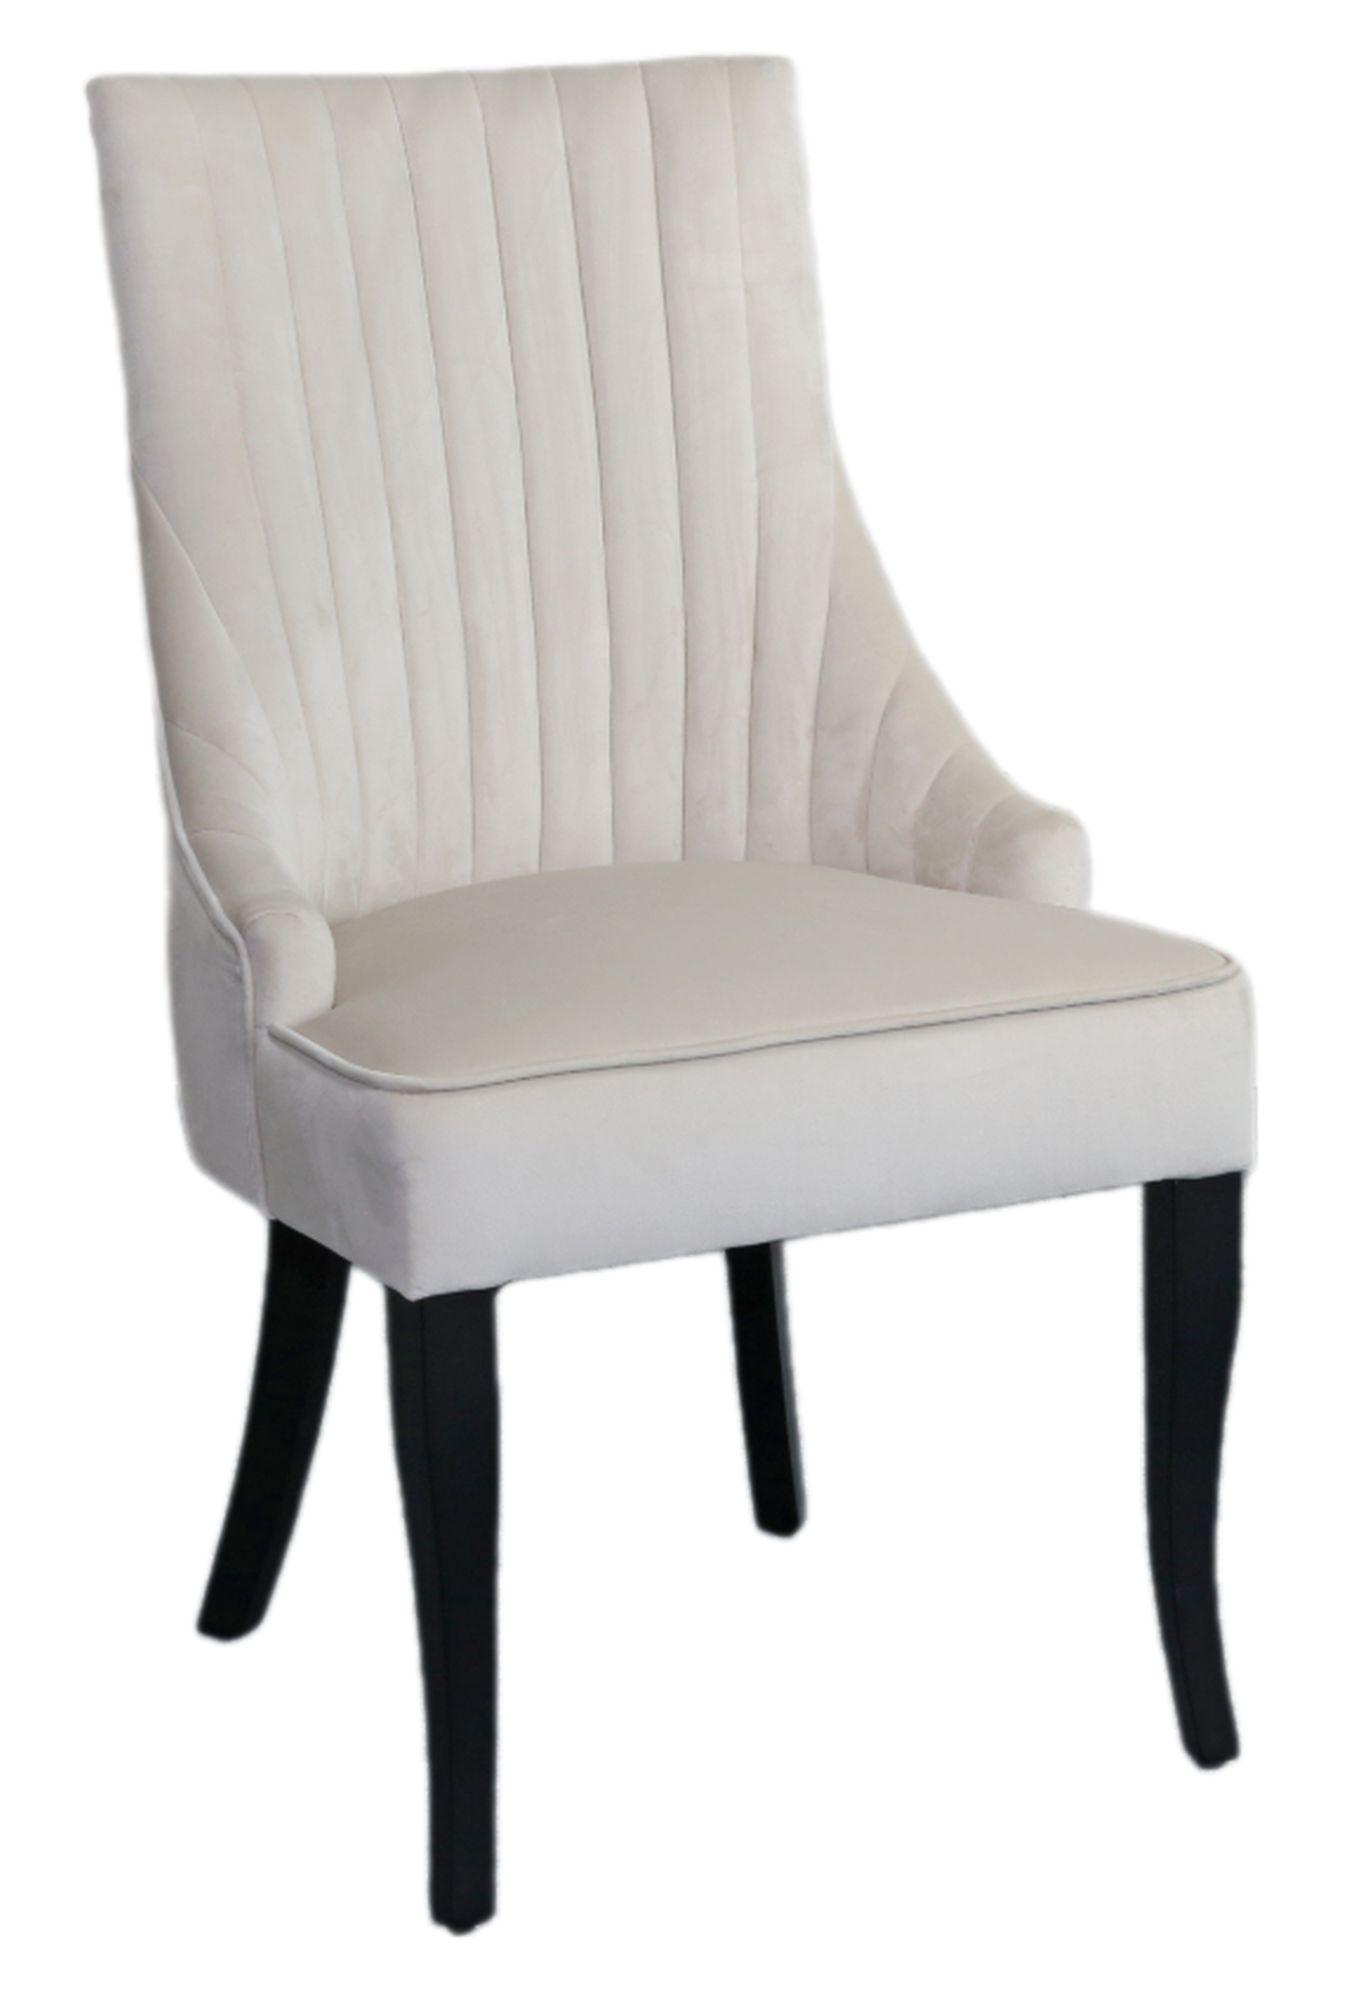 Sofie Champagne Dining Chair, Tufted Velvet Fabric Upholstered with Black Wooden Legs